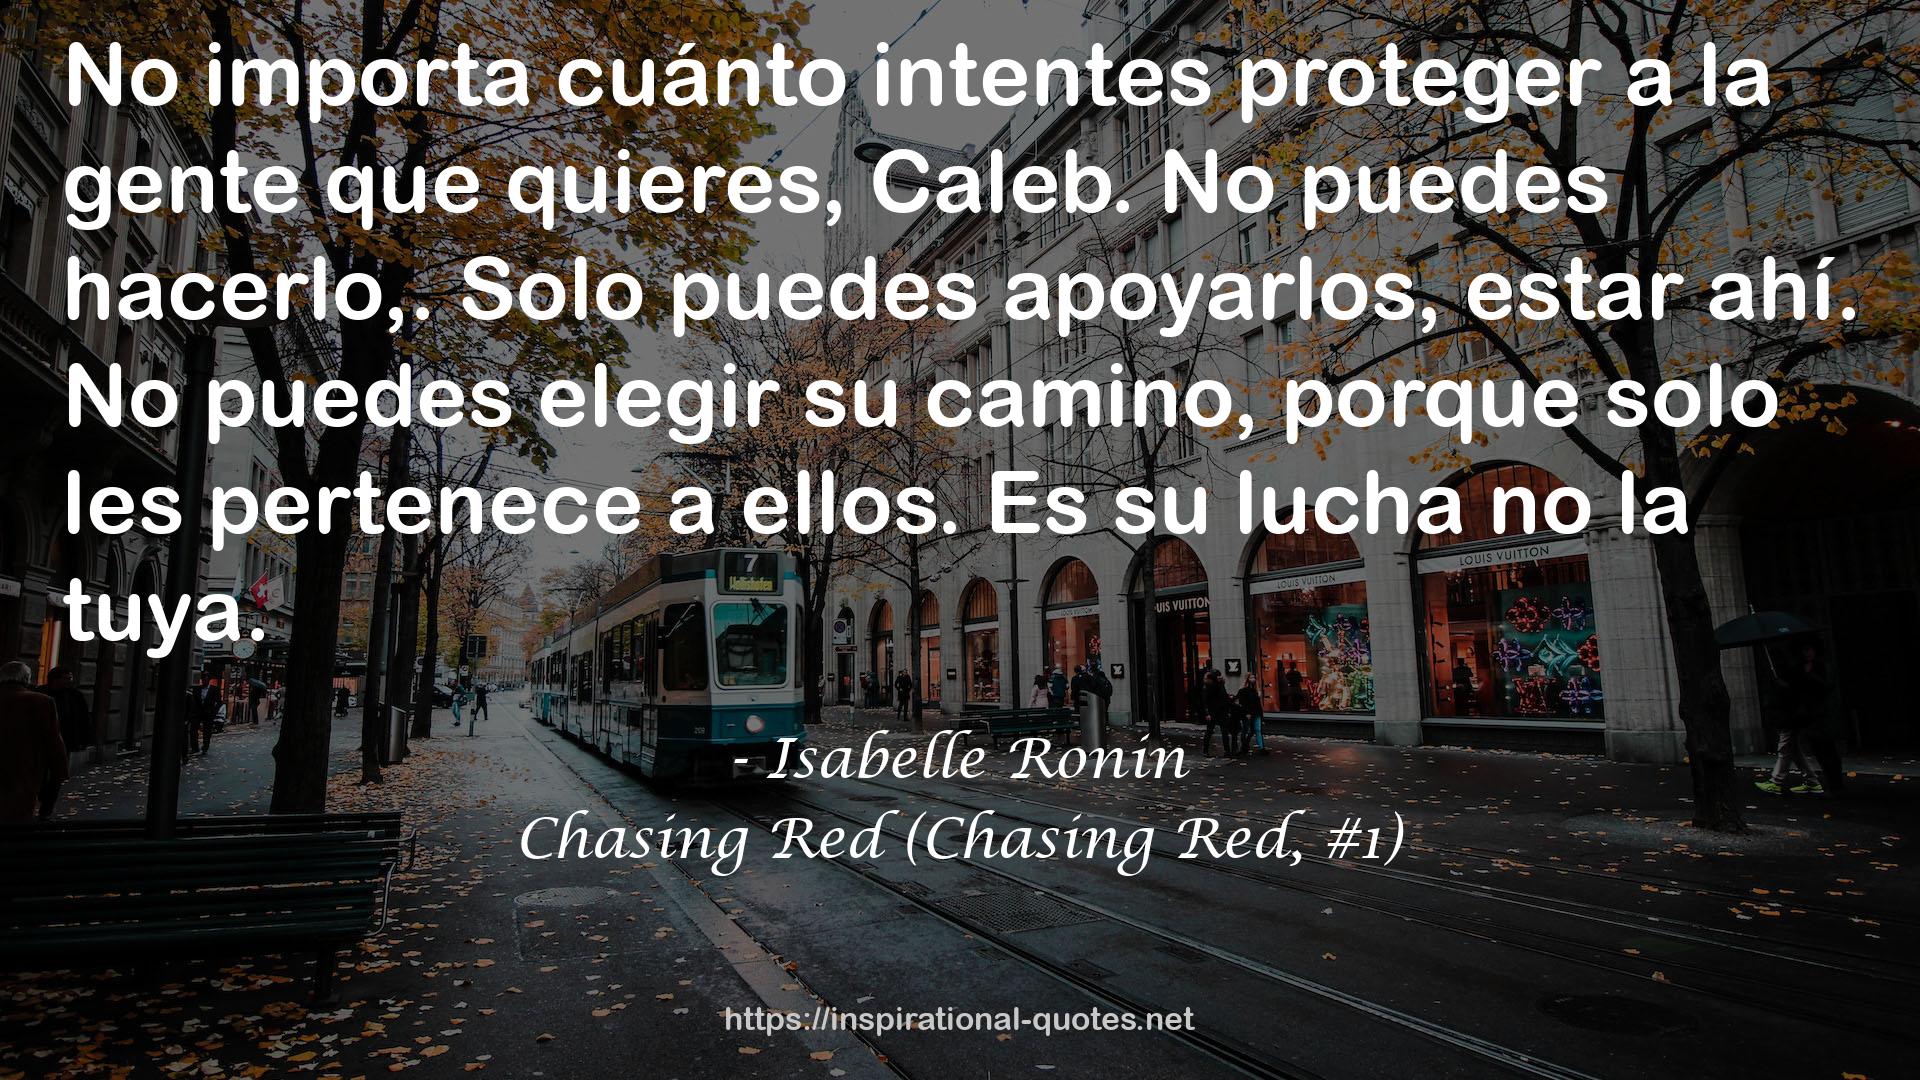 Chasing Red (Chasing Red, #1) QUOTES